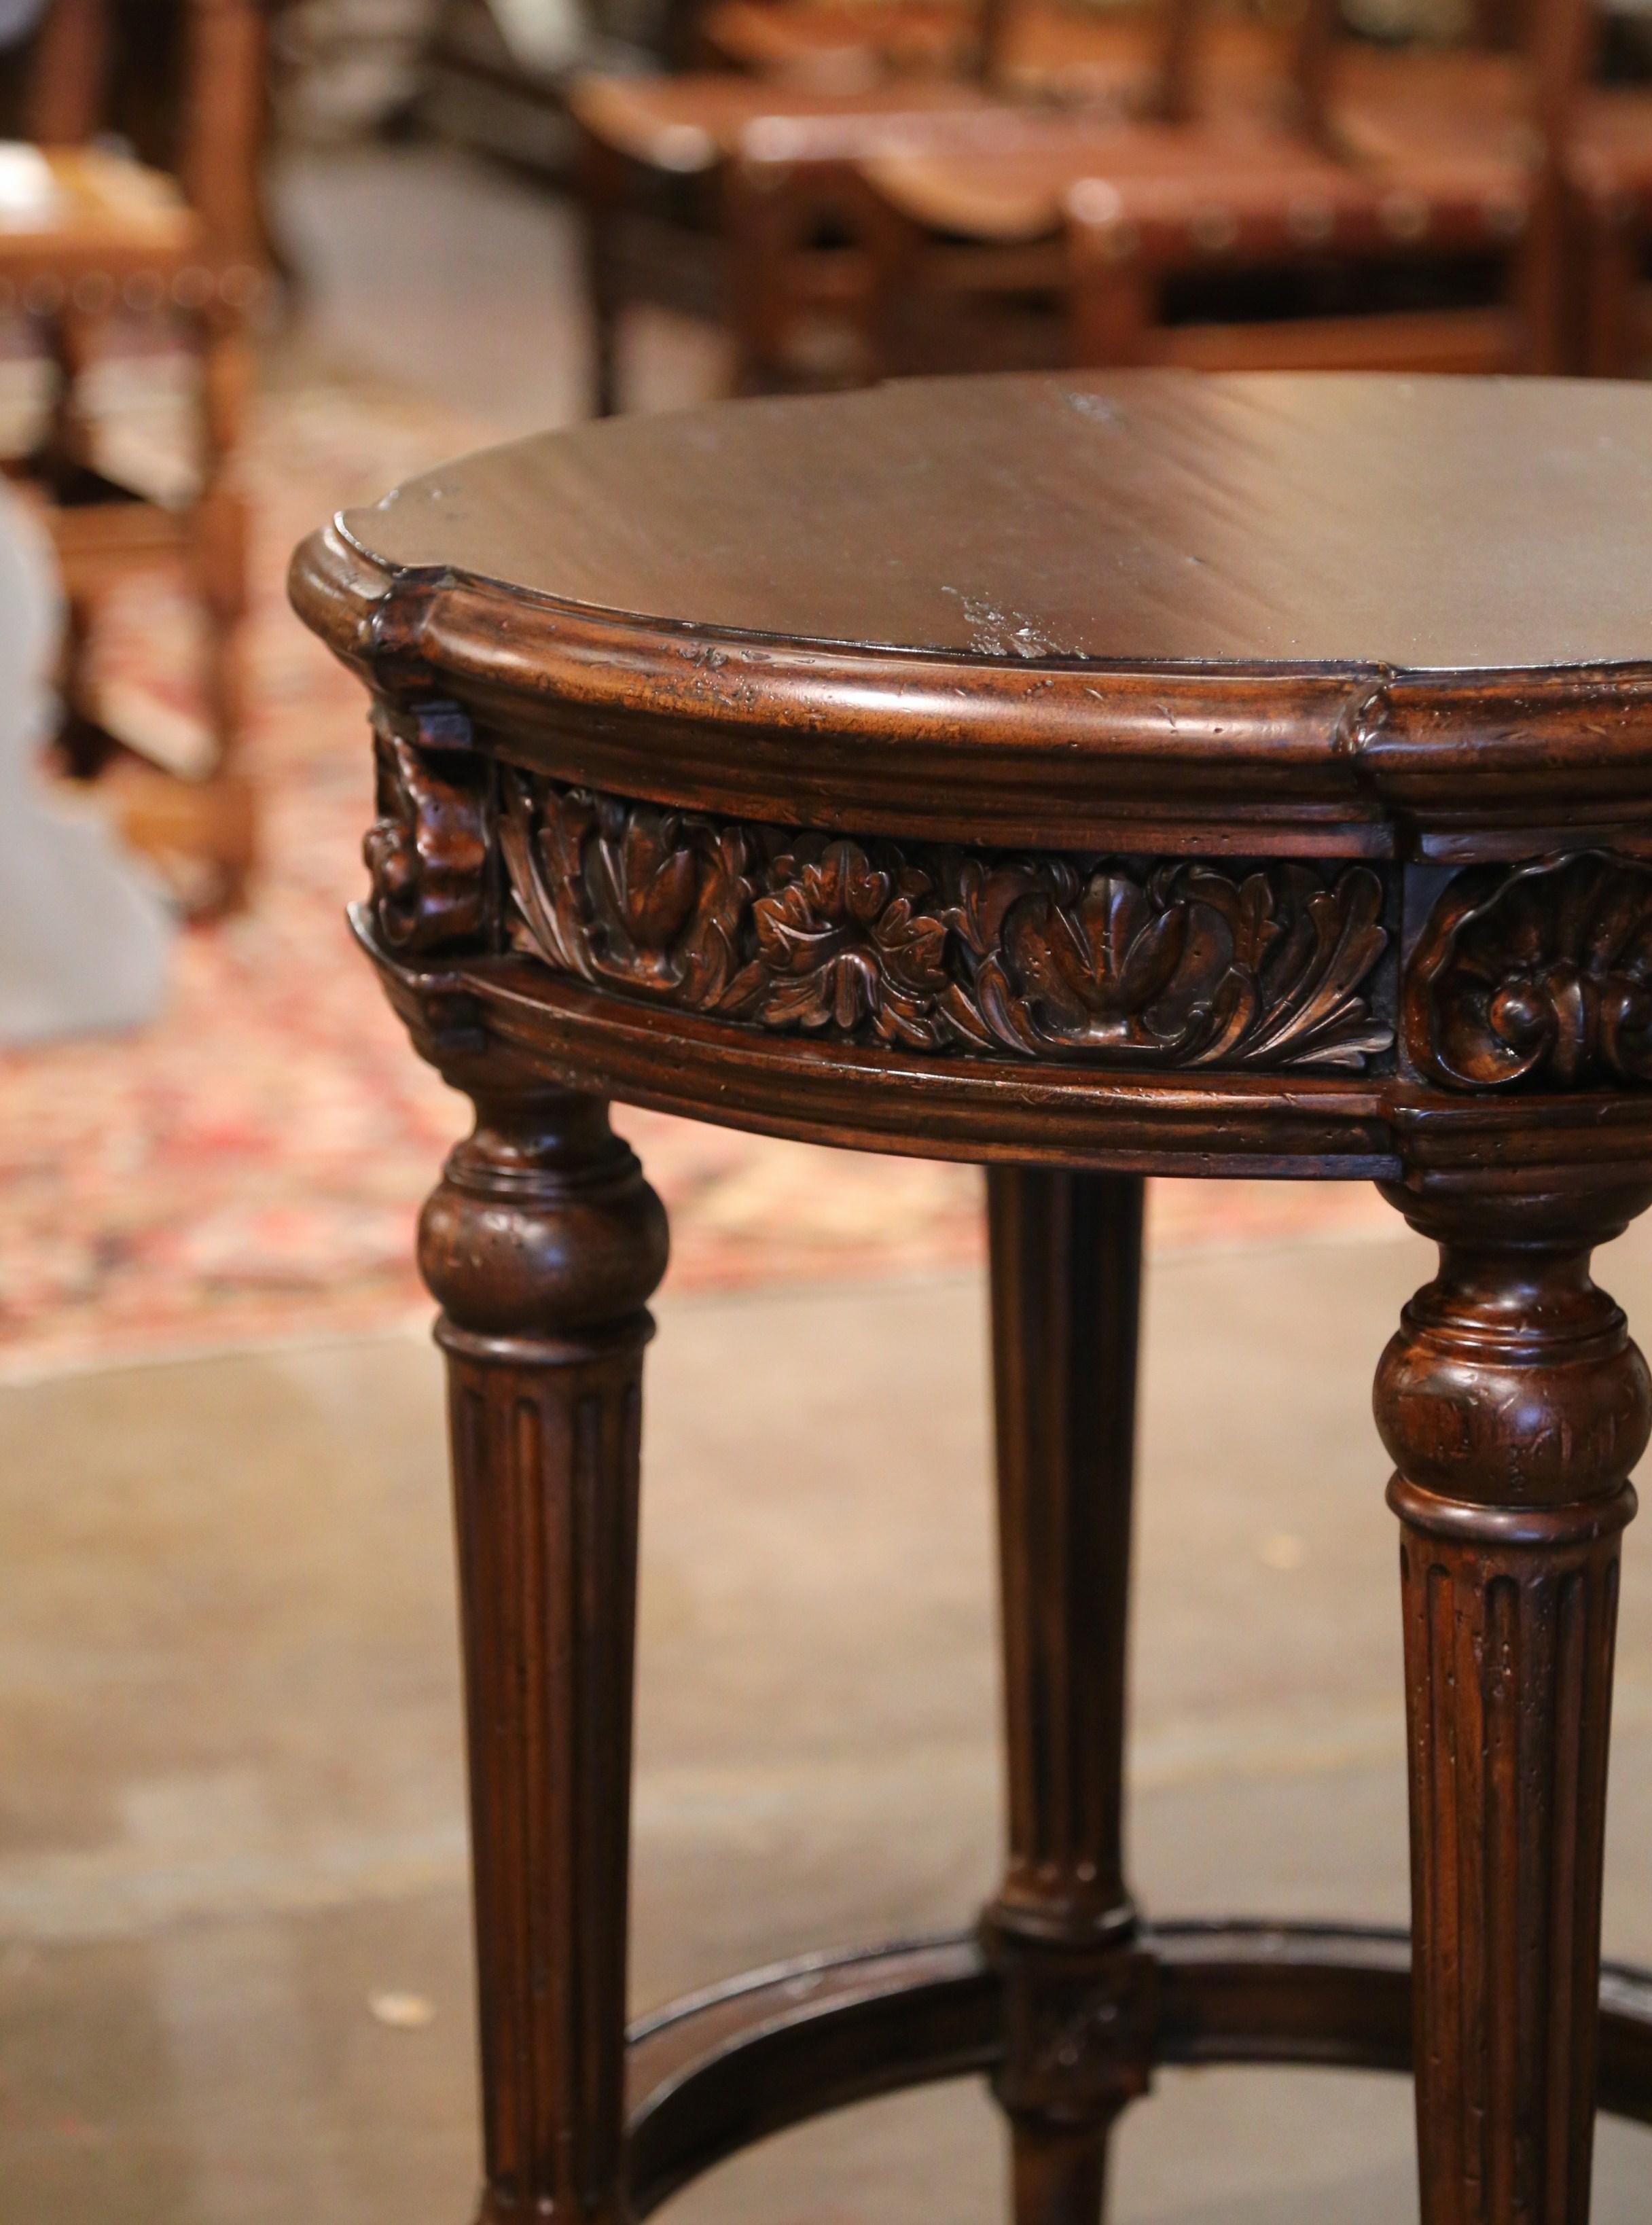 Vintage Louis XVI Style Carved Walnut Gueridon Side Table from Habersham In Excellent Condition For Sale In Dallas, TX